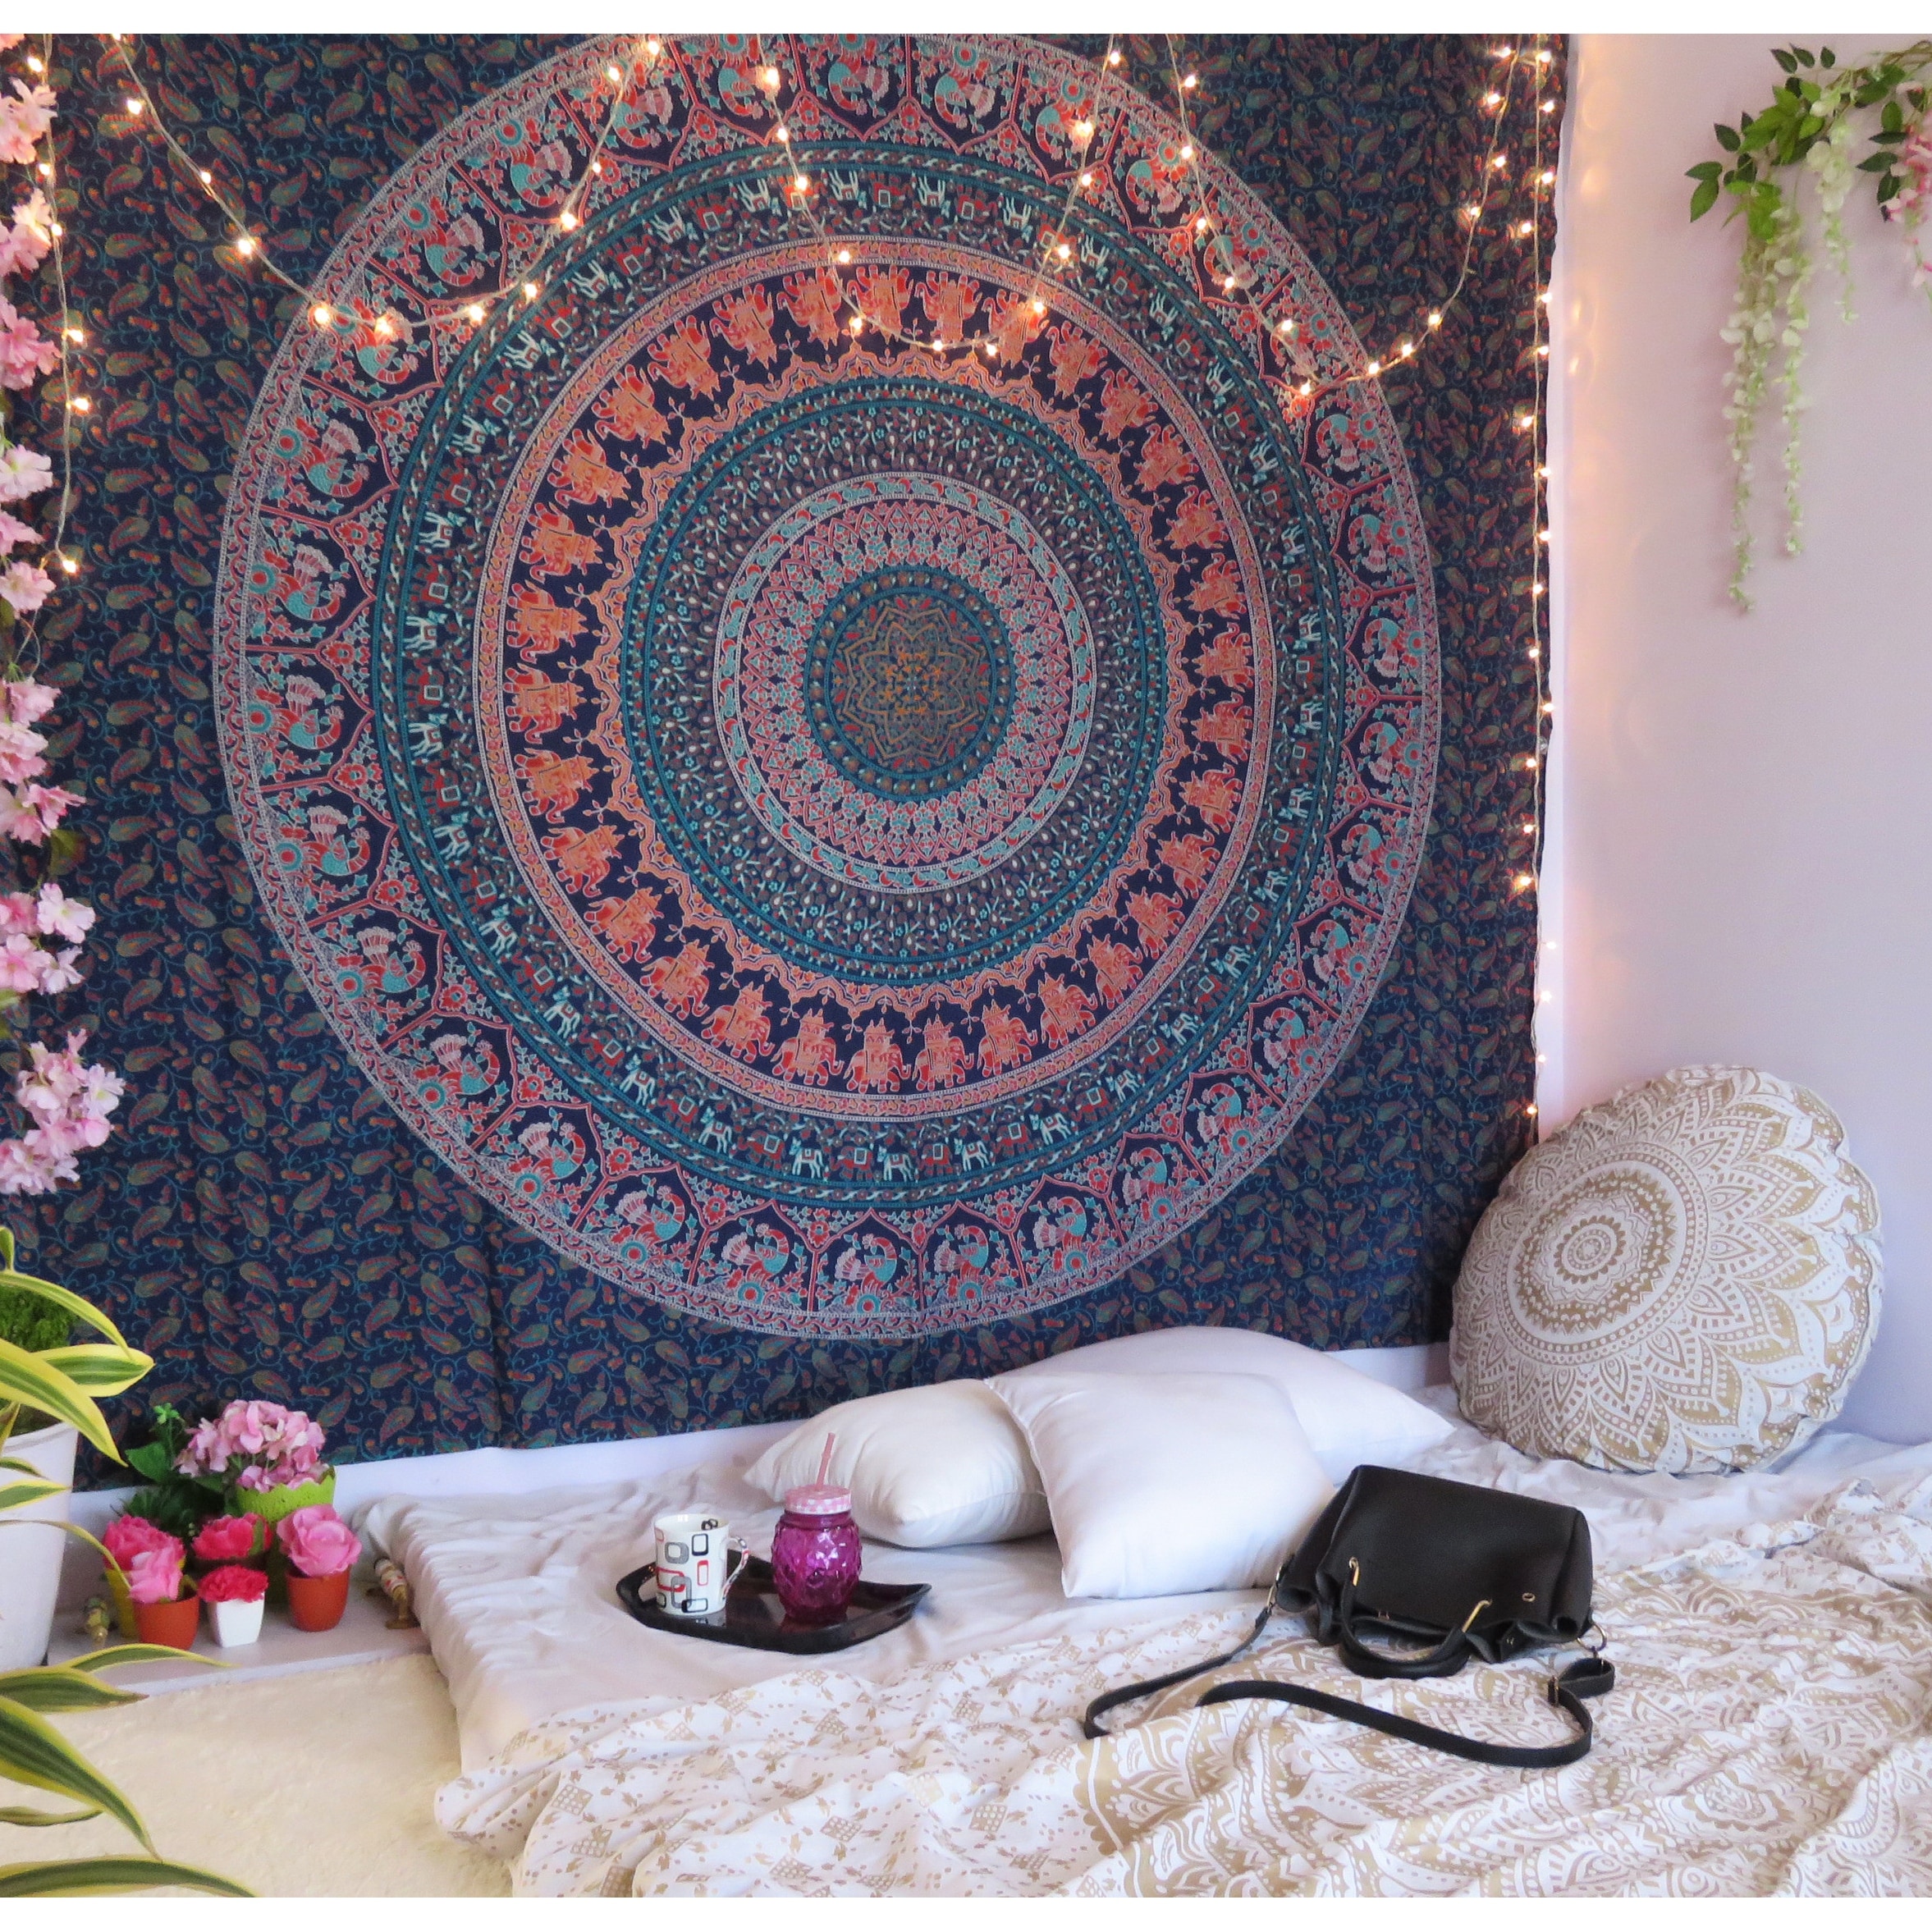 Mandala Tapestry Indian WallHanging Decor Bohemian Hippie Poster Bedspread Throw 